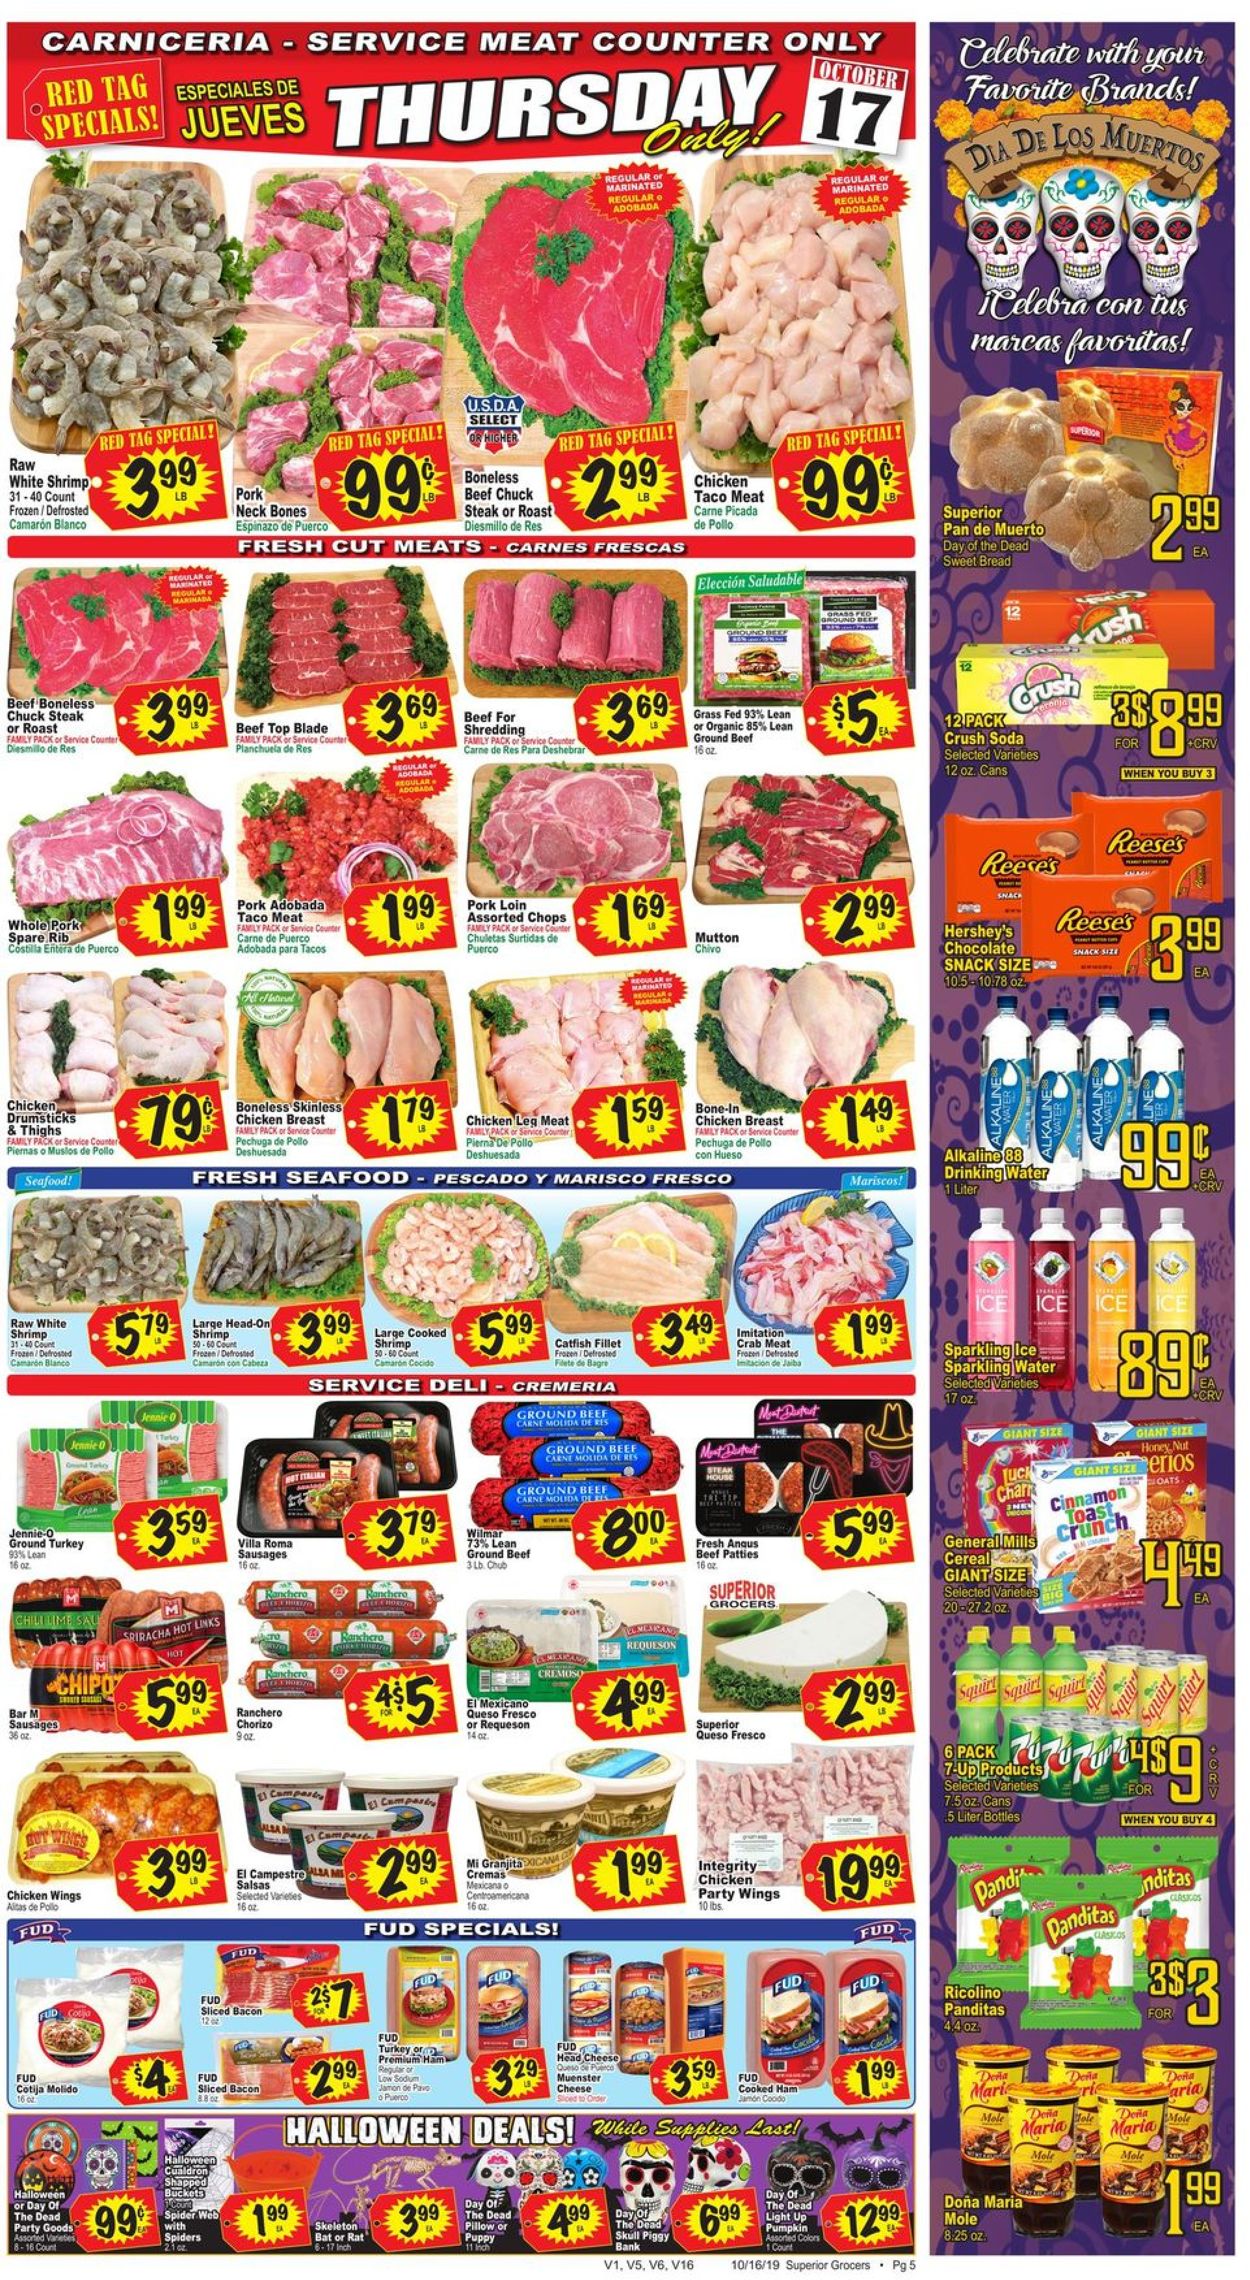 Superior Grocers Ad from 10/16/2019